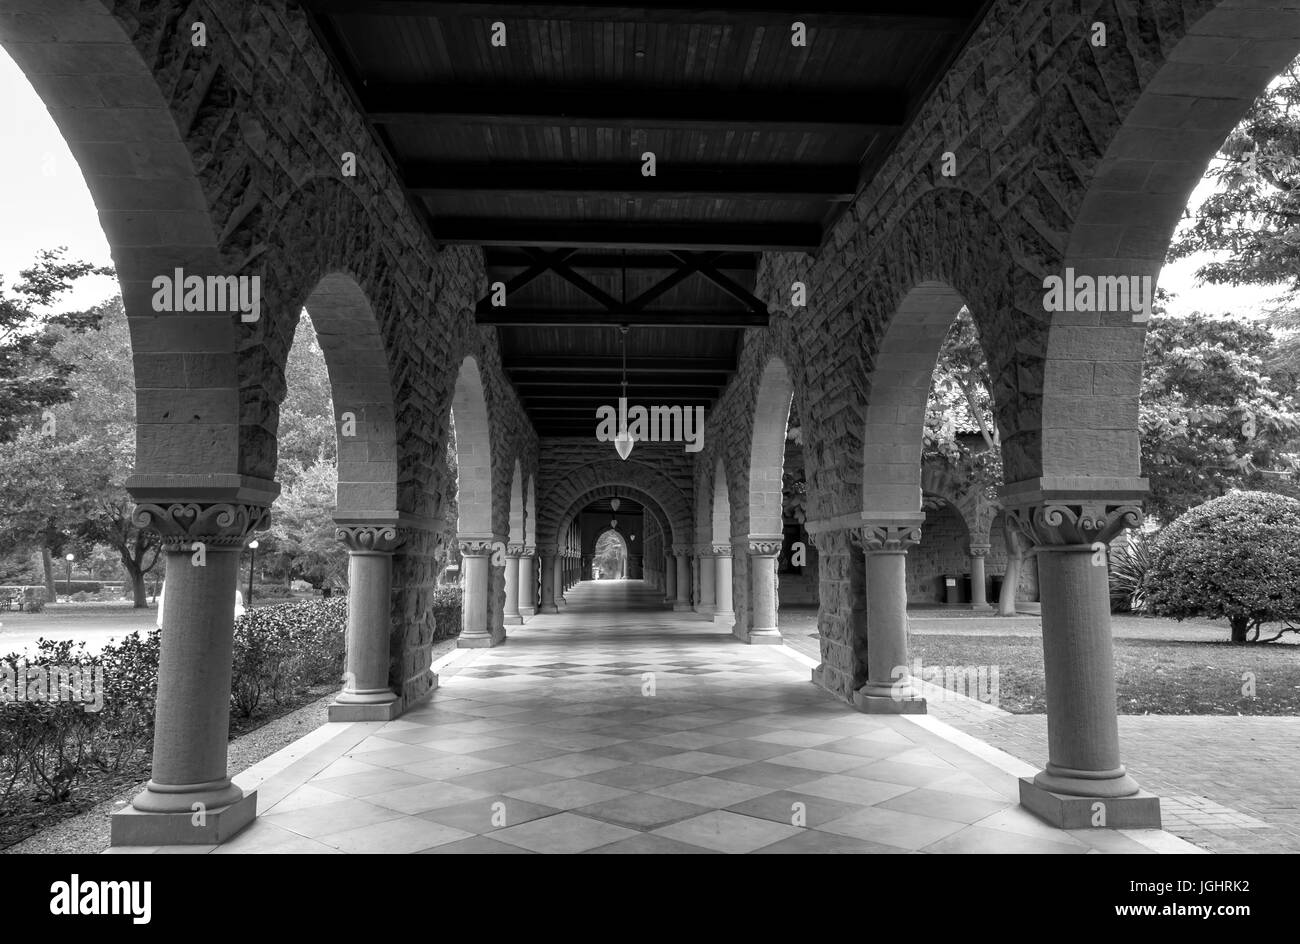 The architectures of the Stanford University campus in Palo Alto, California, USA Stock Photo